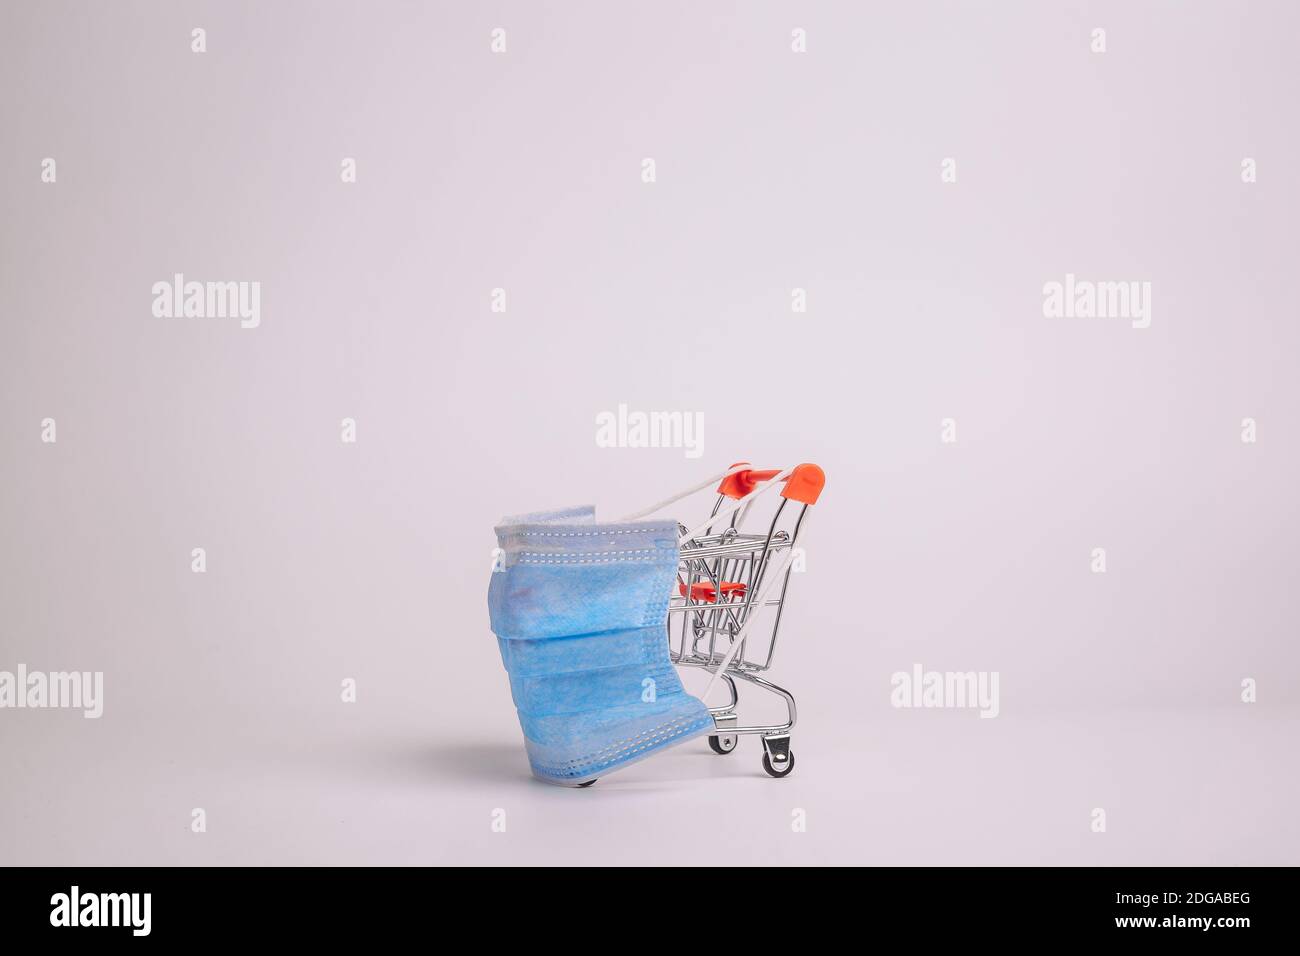 Safe and online shopping on quarantine concept. Shopping cart with protective medical mask against coronavirus. White background, copy space. Stock Photo